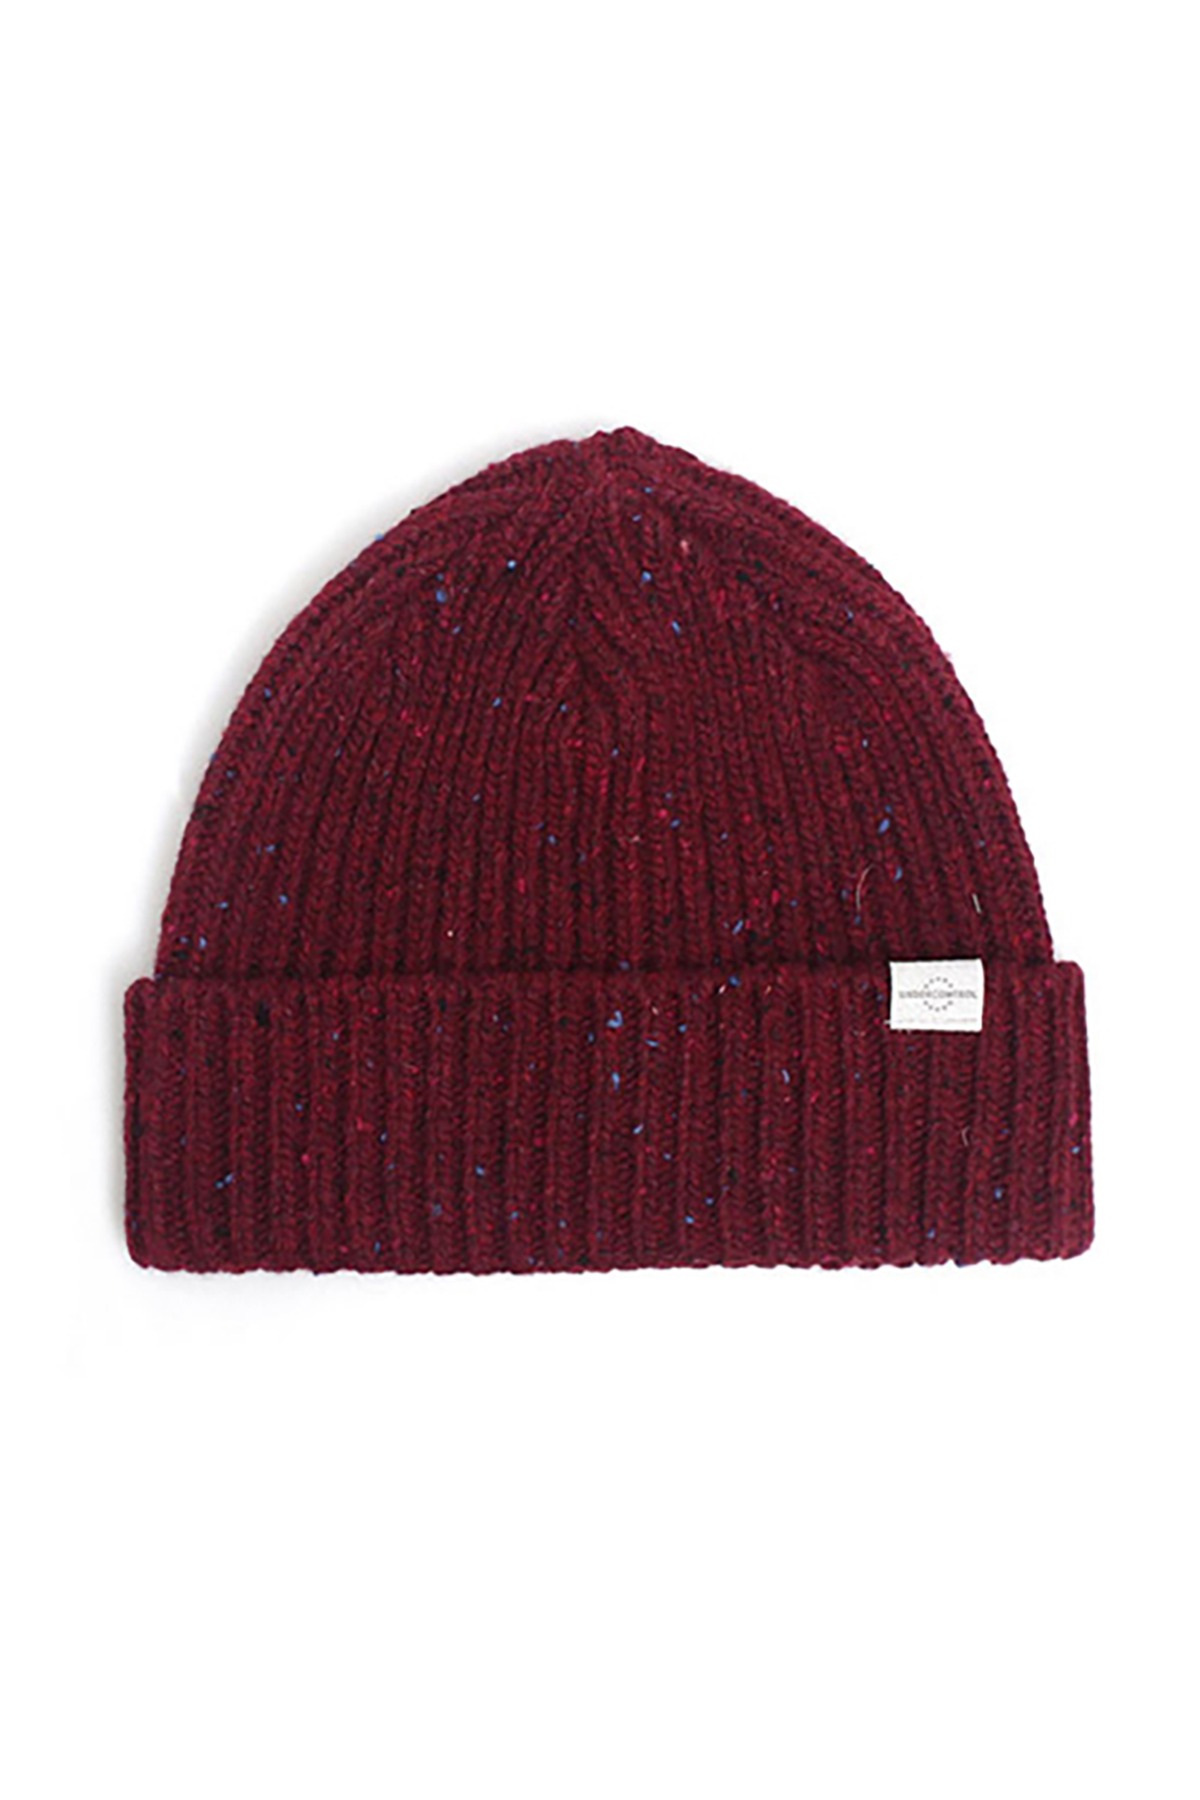 BEANIE / BOLD FIT / WOOL / NEP WINE (BOX PACKAGE)